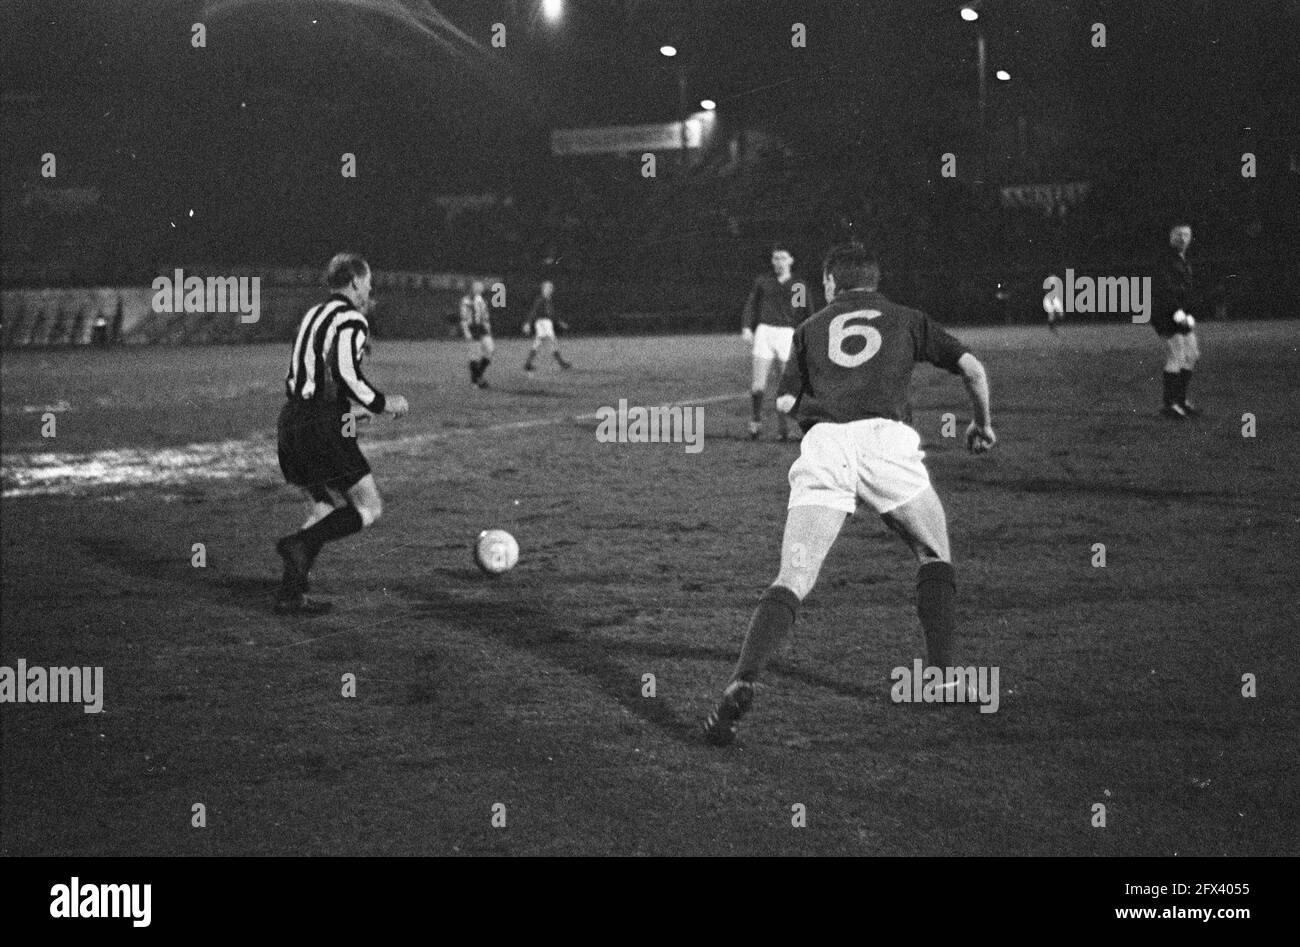 DWV against Volewijckers. Honorary match in Olympic Stadium. game time (final score 2-4 for the Volewijckers), 4 April 1962, sports, soccer, The Netherlands, 20th century press agency photo, news to remember, documentary, historic photography 1945-1990, visual stories, human history of the Twentieth Century, capturing moments in time Stock Photo